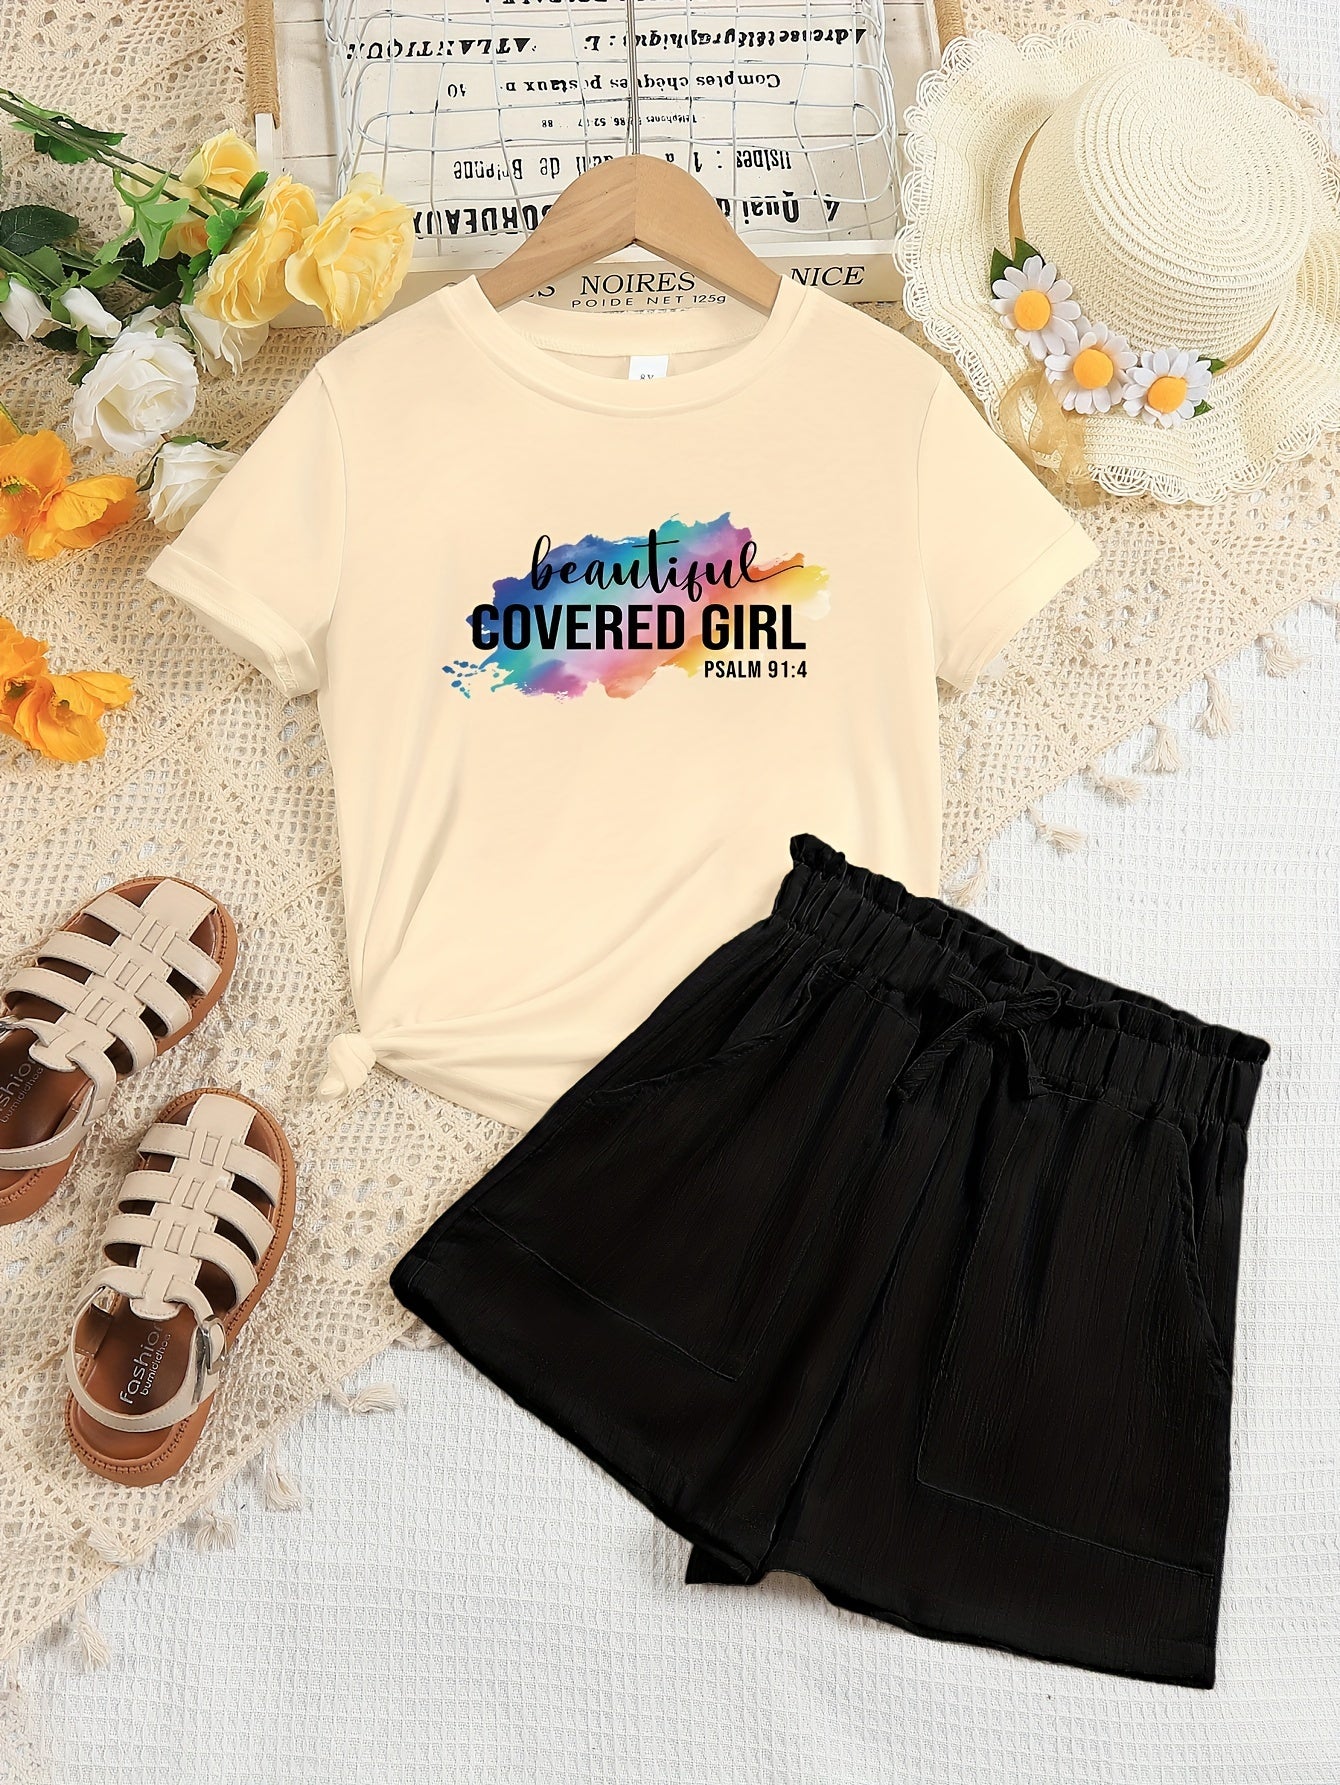 PSALM 91:4 BEAUTIFUL COVERED GIRL Youth Christian Casual Outfit claimedbygoddesigns